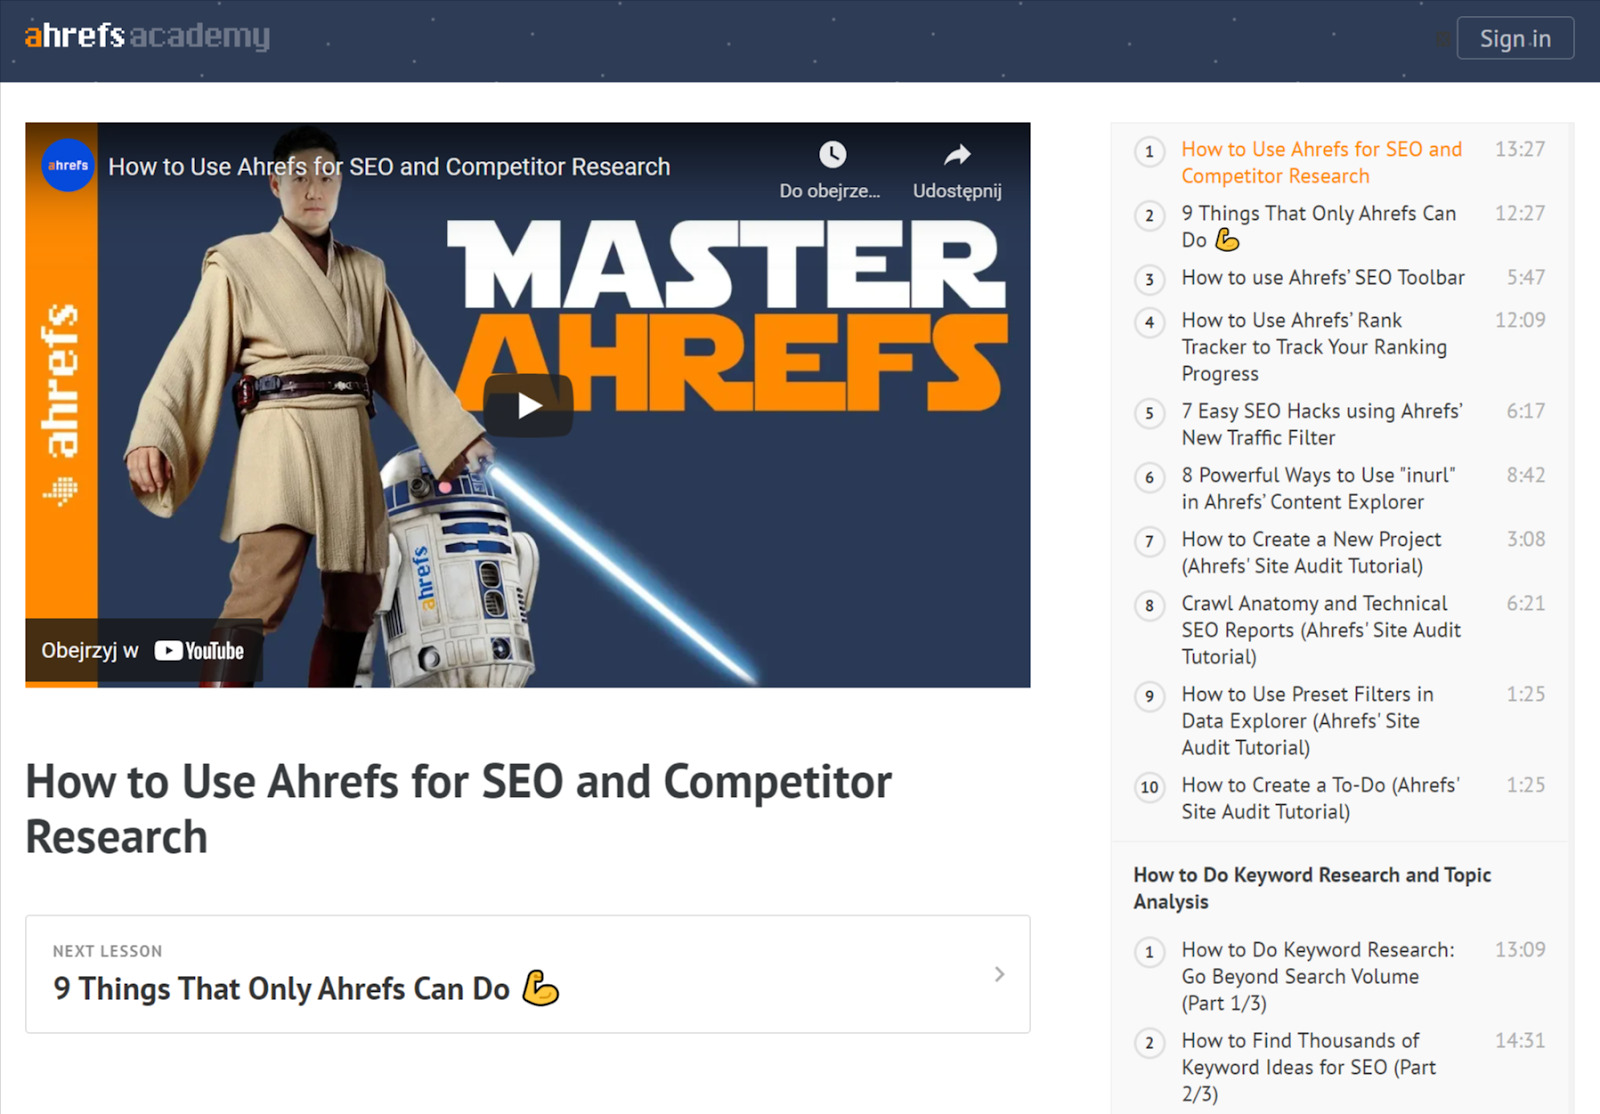 Video of a full course in Ahrefs Academy